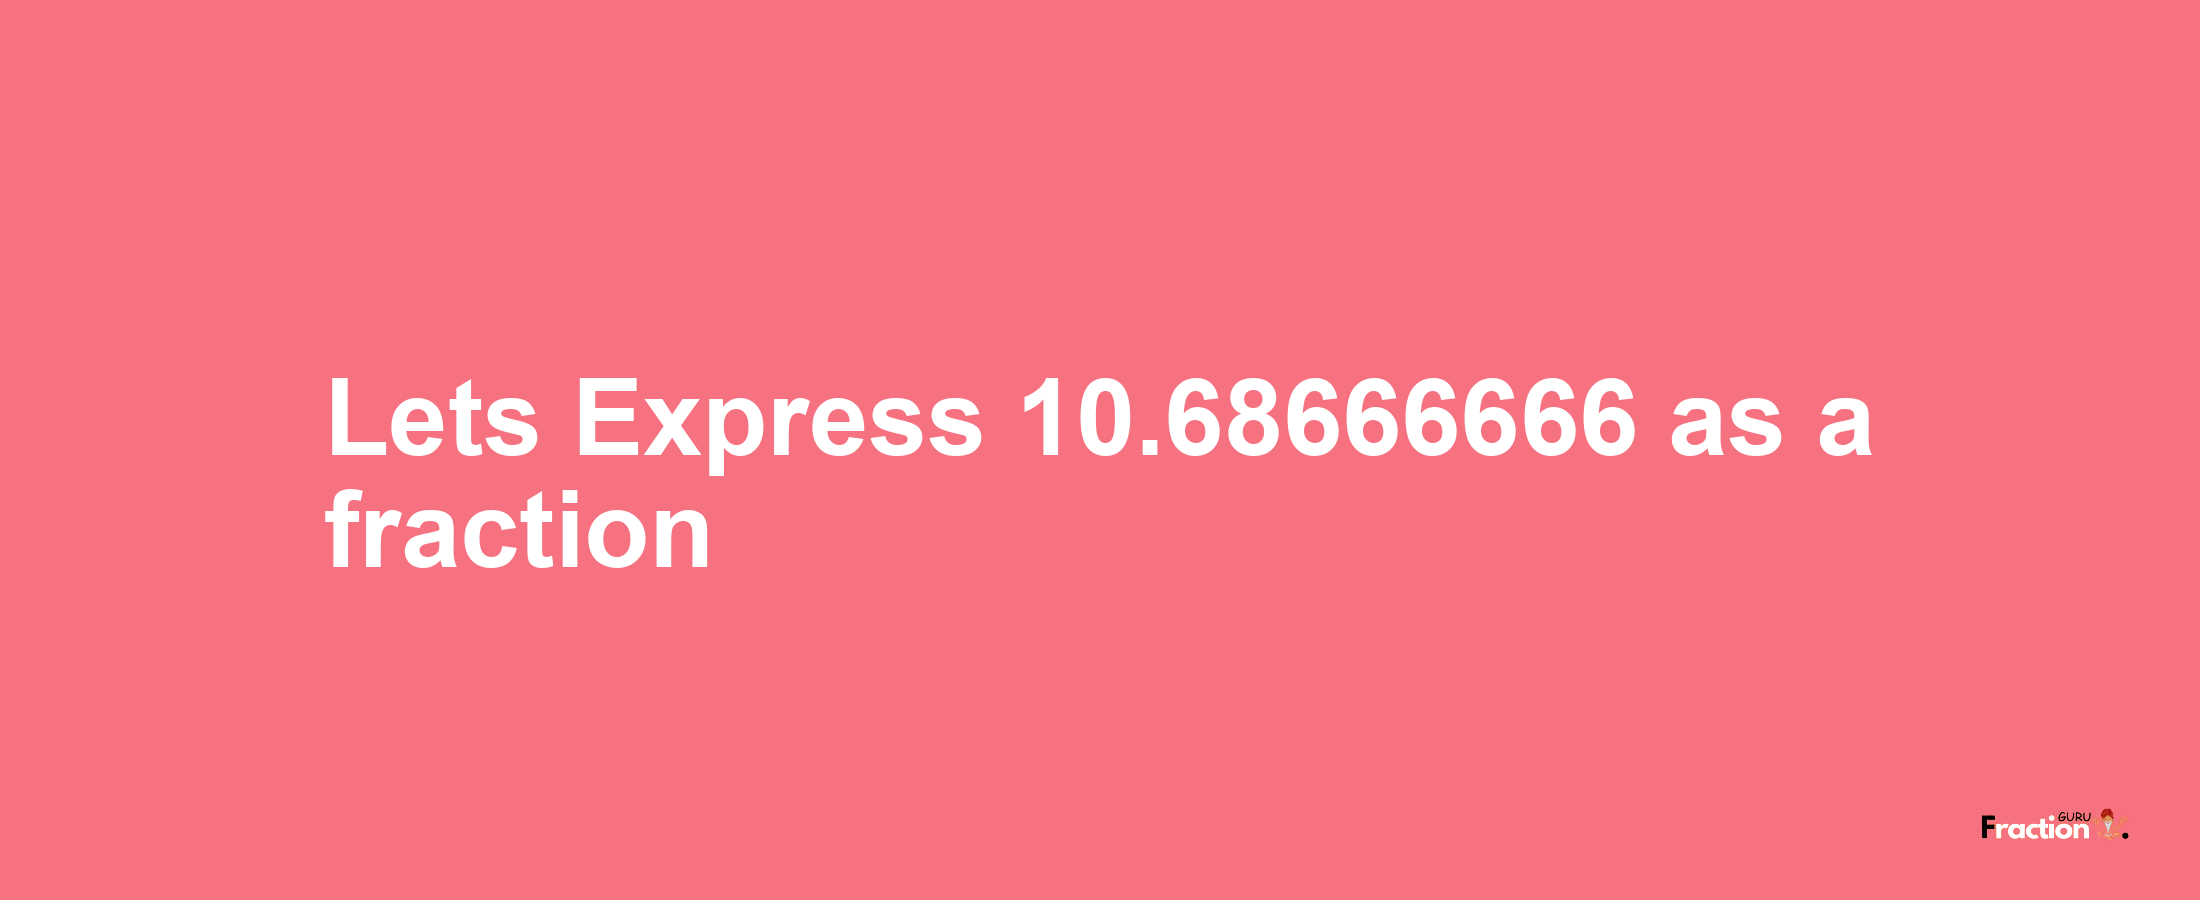 Lets Express 10.68666666 as afraction